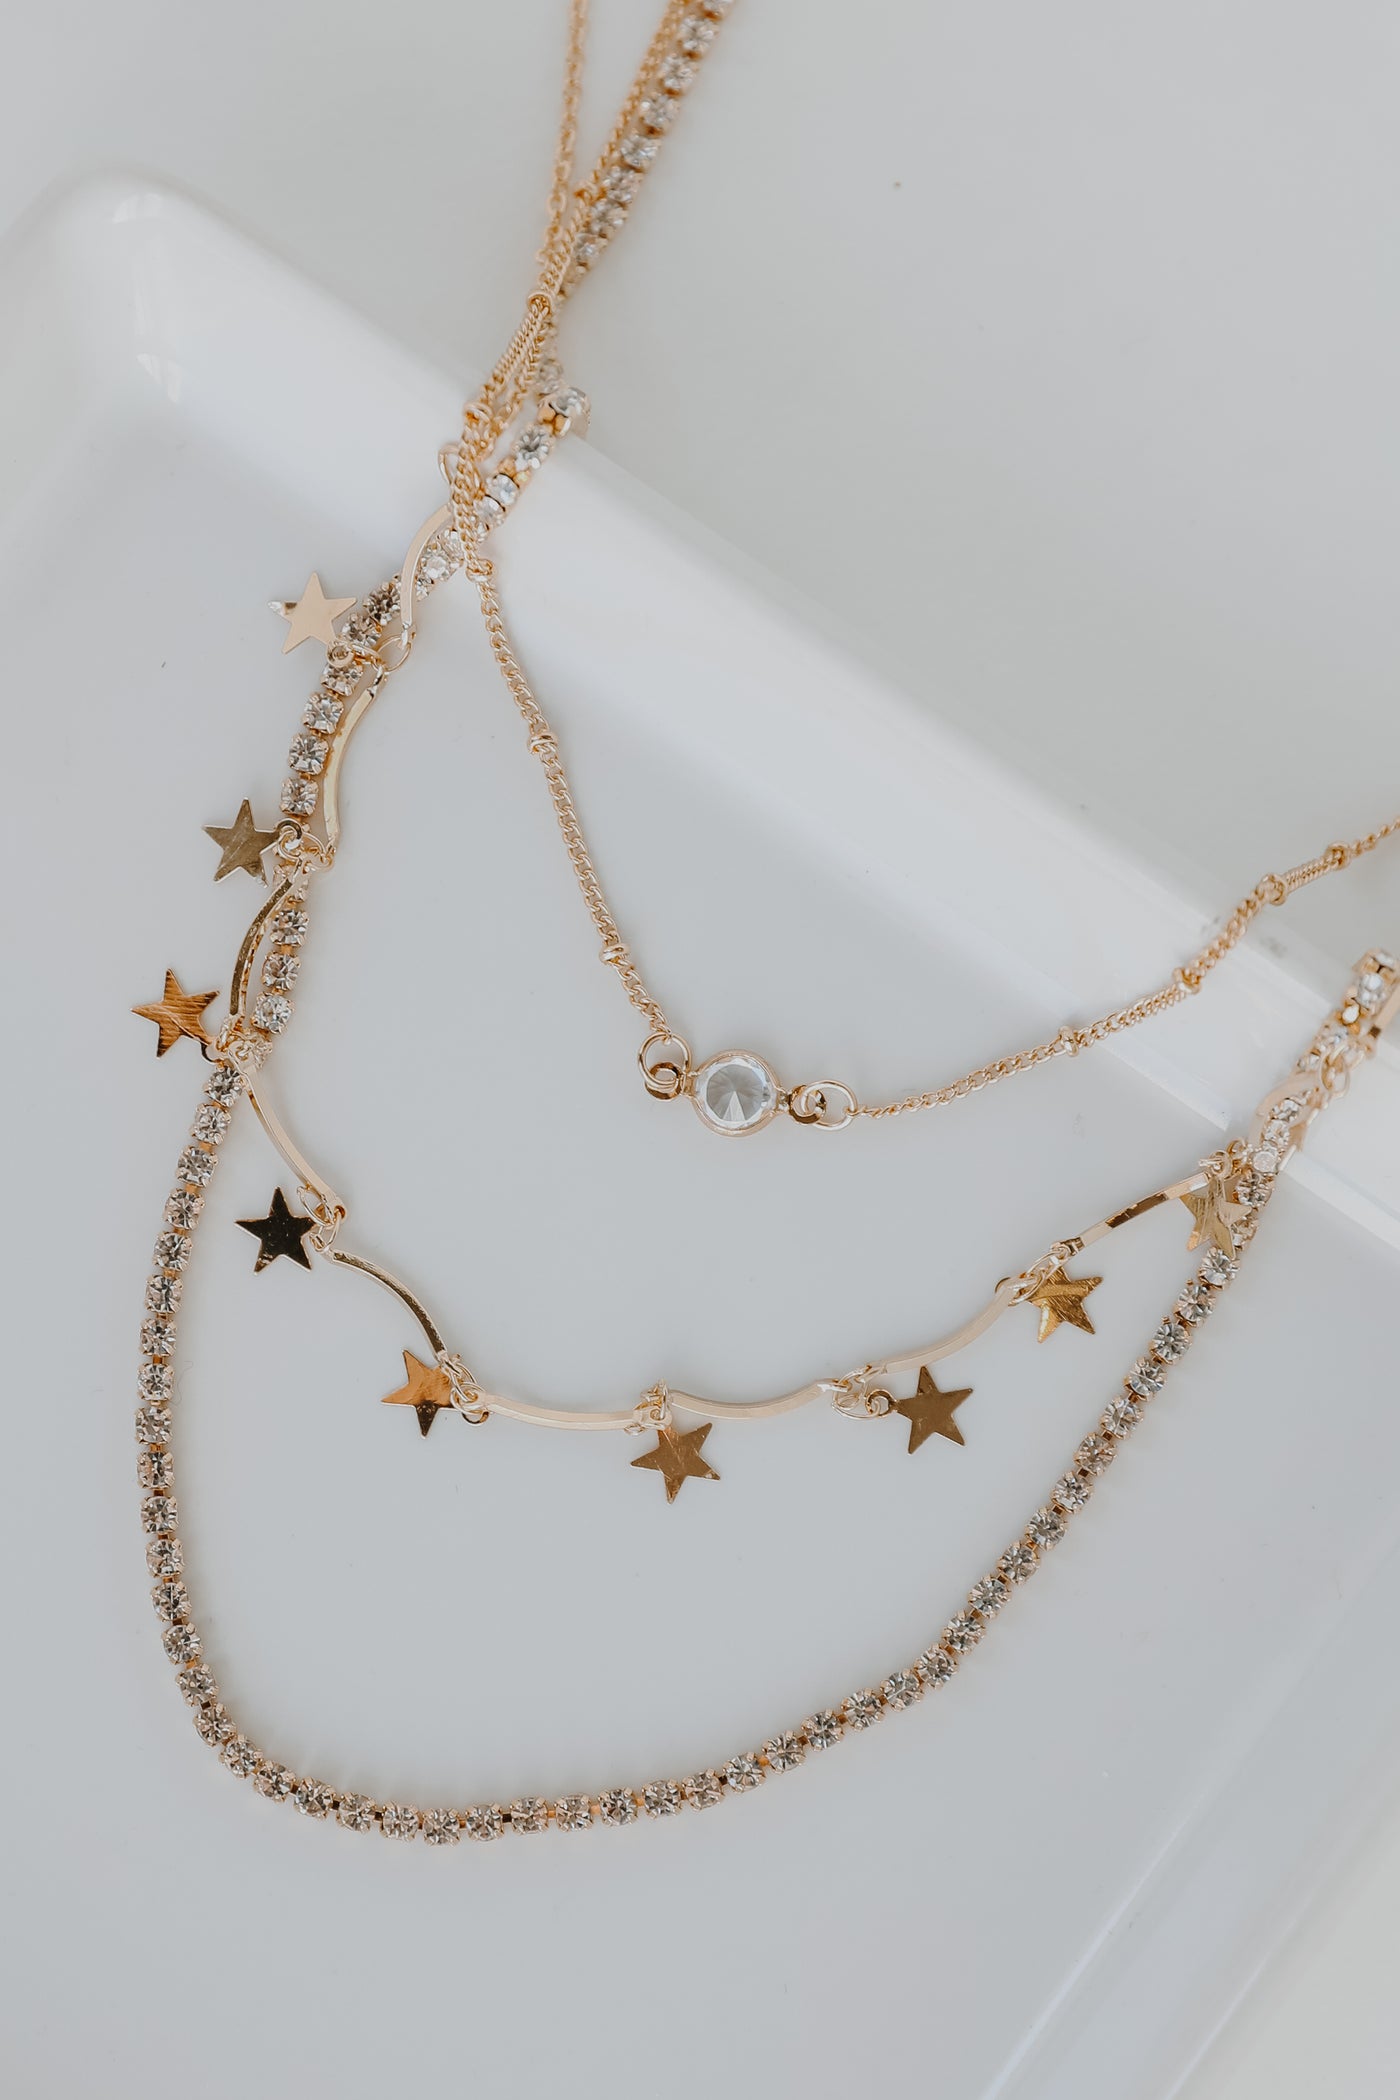 Gold Star + Rhinestone Layered Necklace from dress up